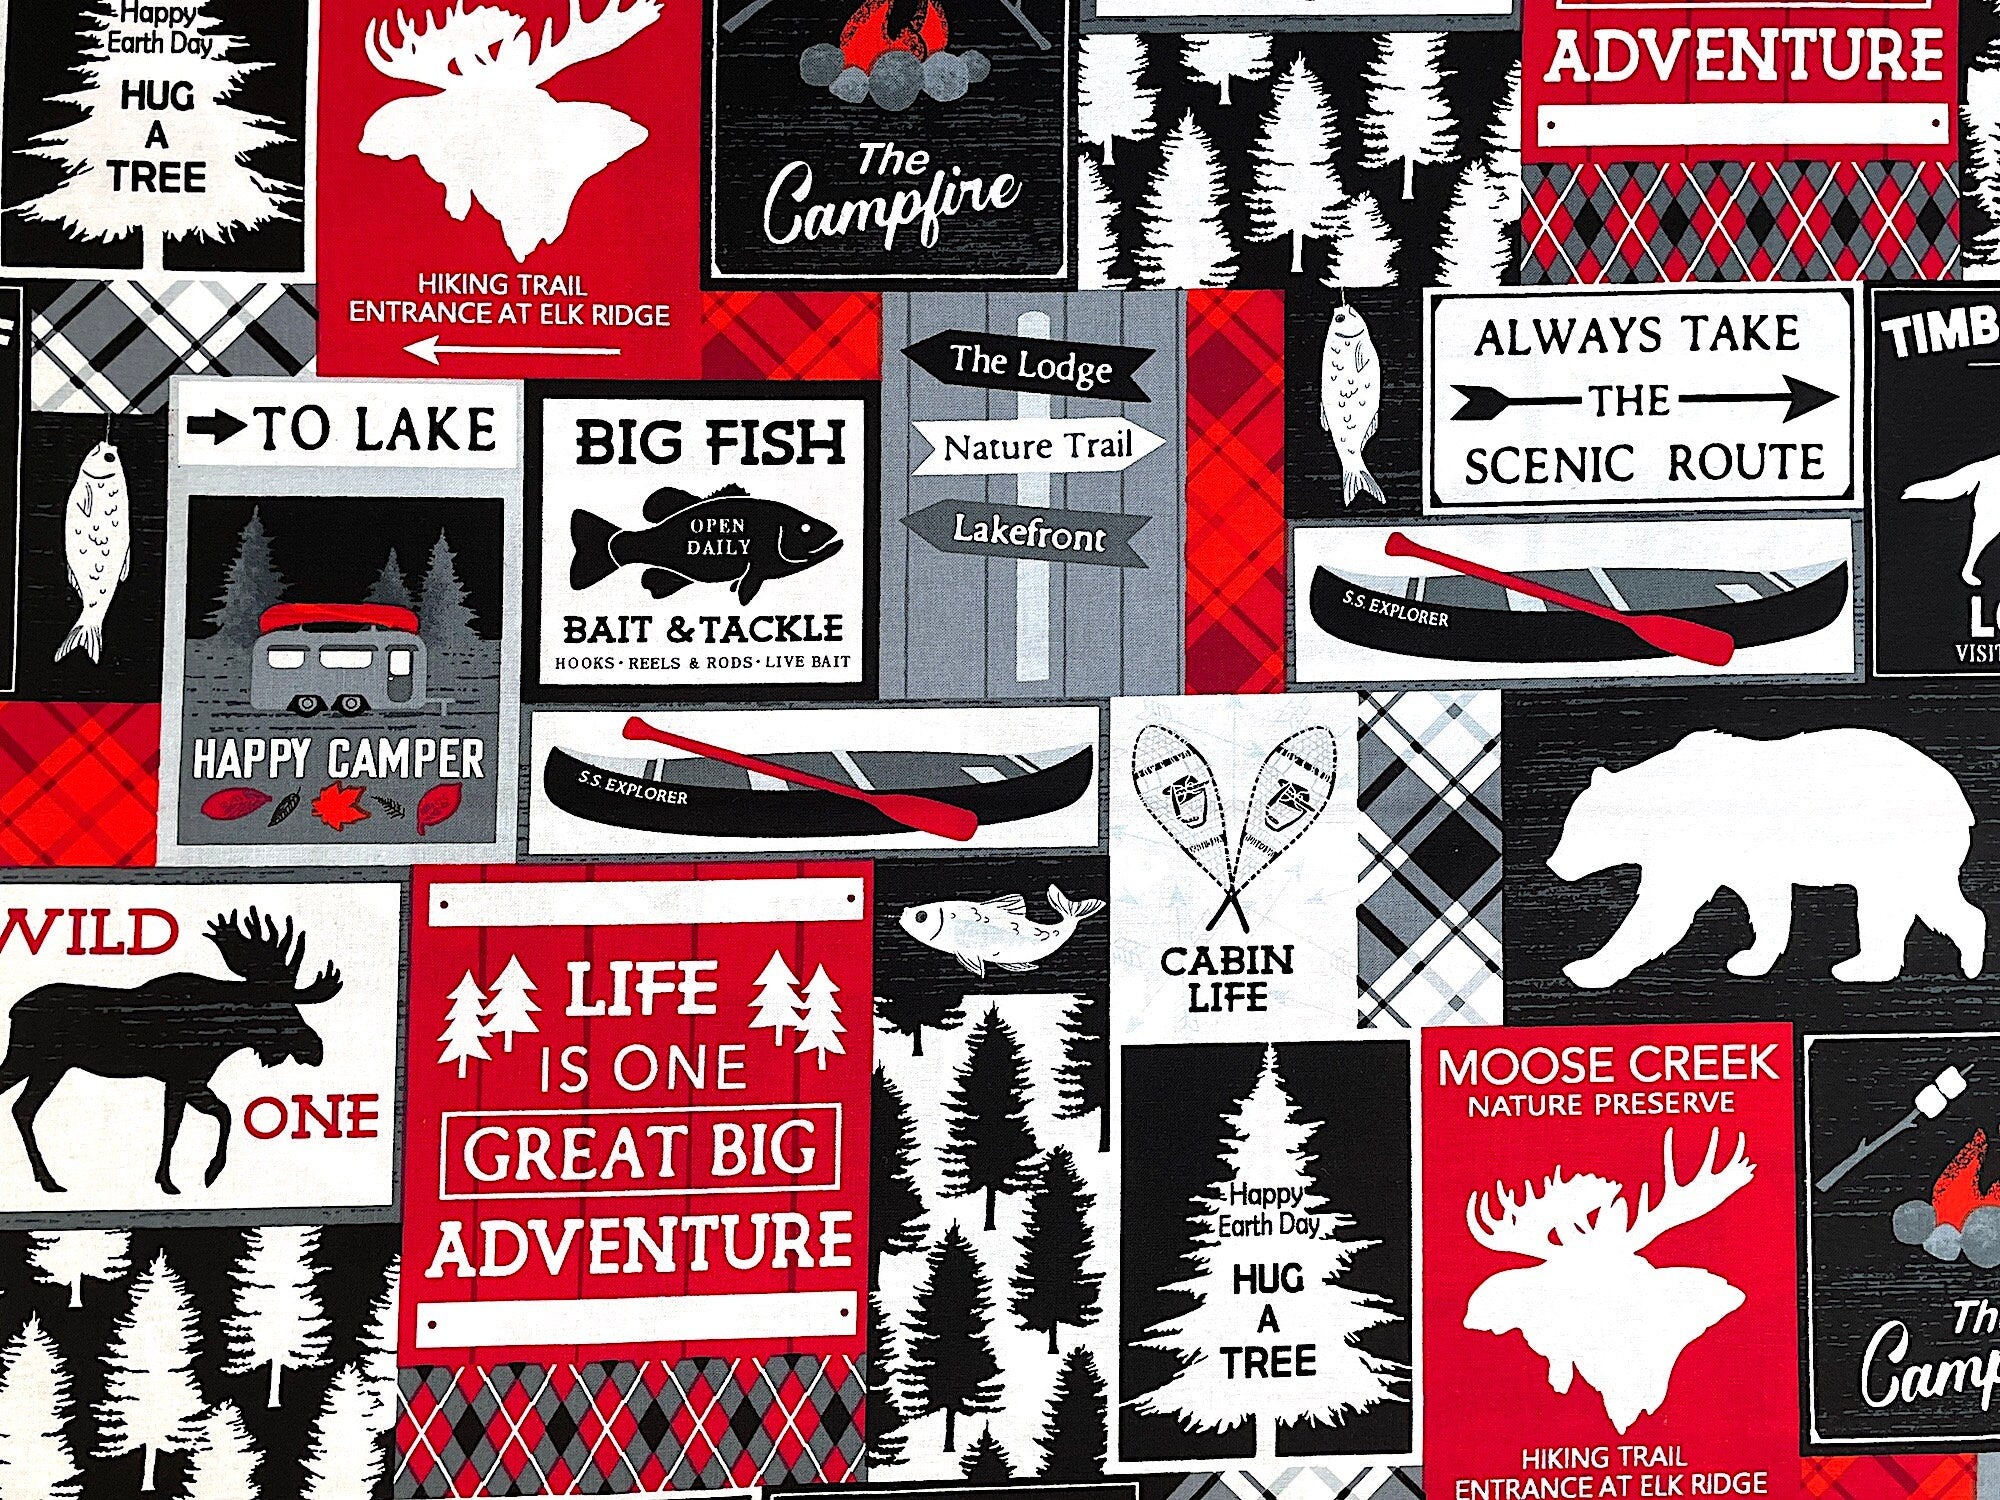 This fabric is called Cabin Life and is part of the Great Outdoors collection by Kanvas Studio. This black, white and red fabric is covered with rv's, fish, wolf, canoes, elk, campfires, trees and more. Various sayings such as the campfire, happy earth day hug a tree, to lake and more are printed throughout the fabric